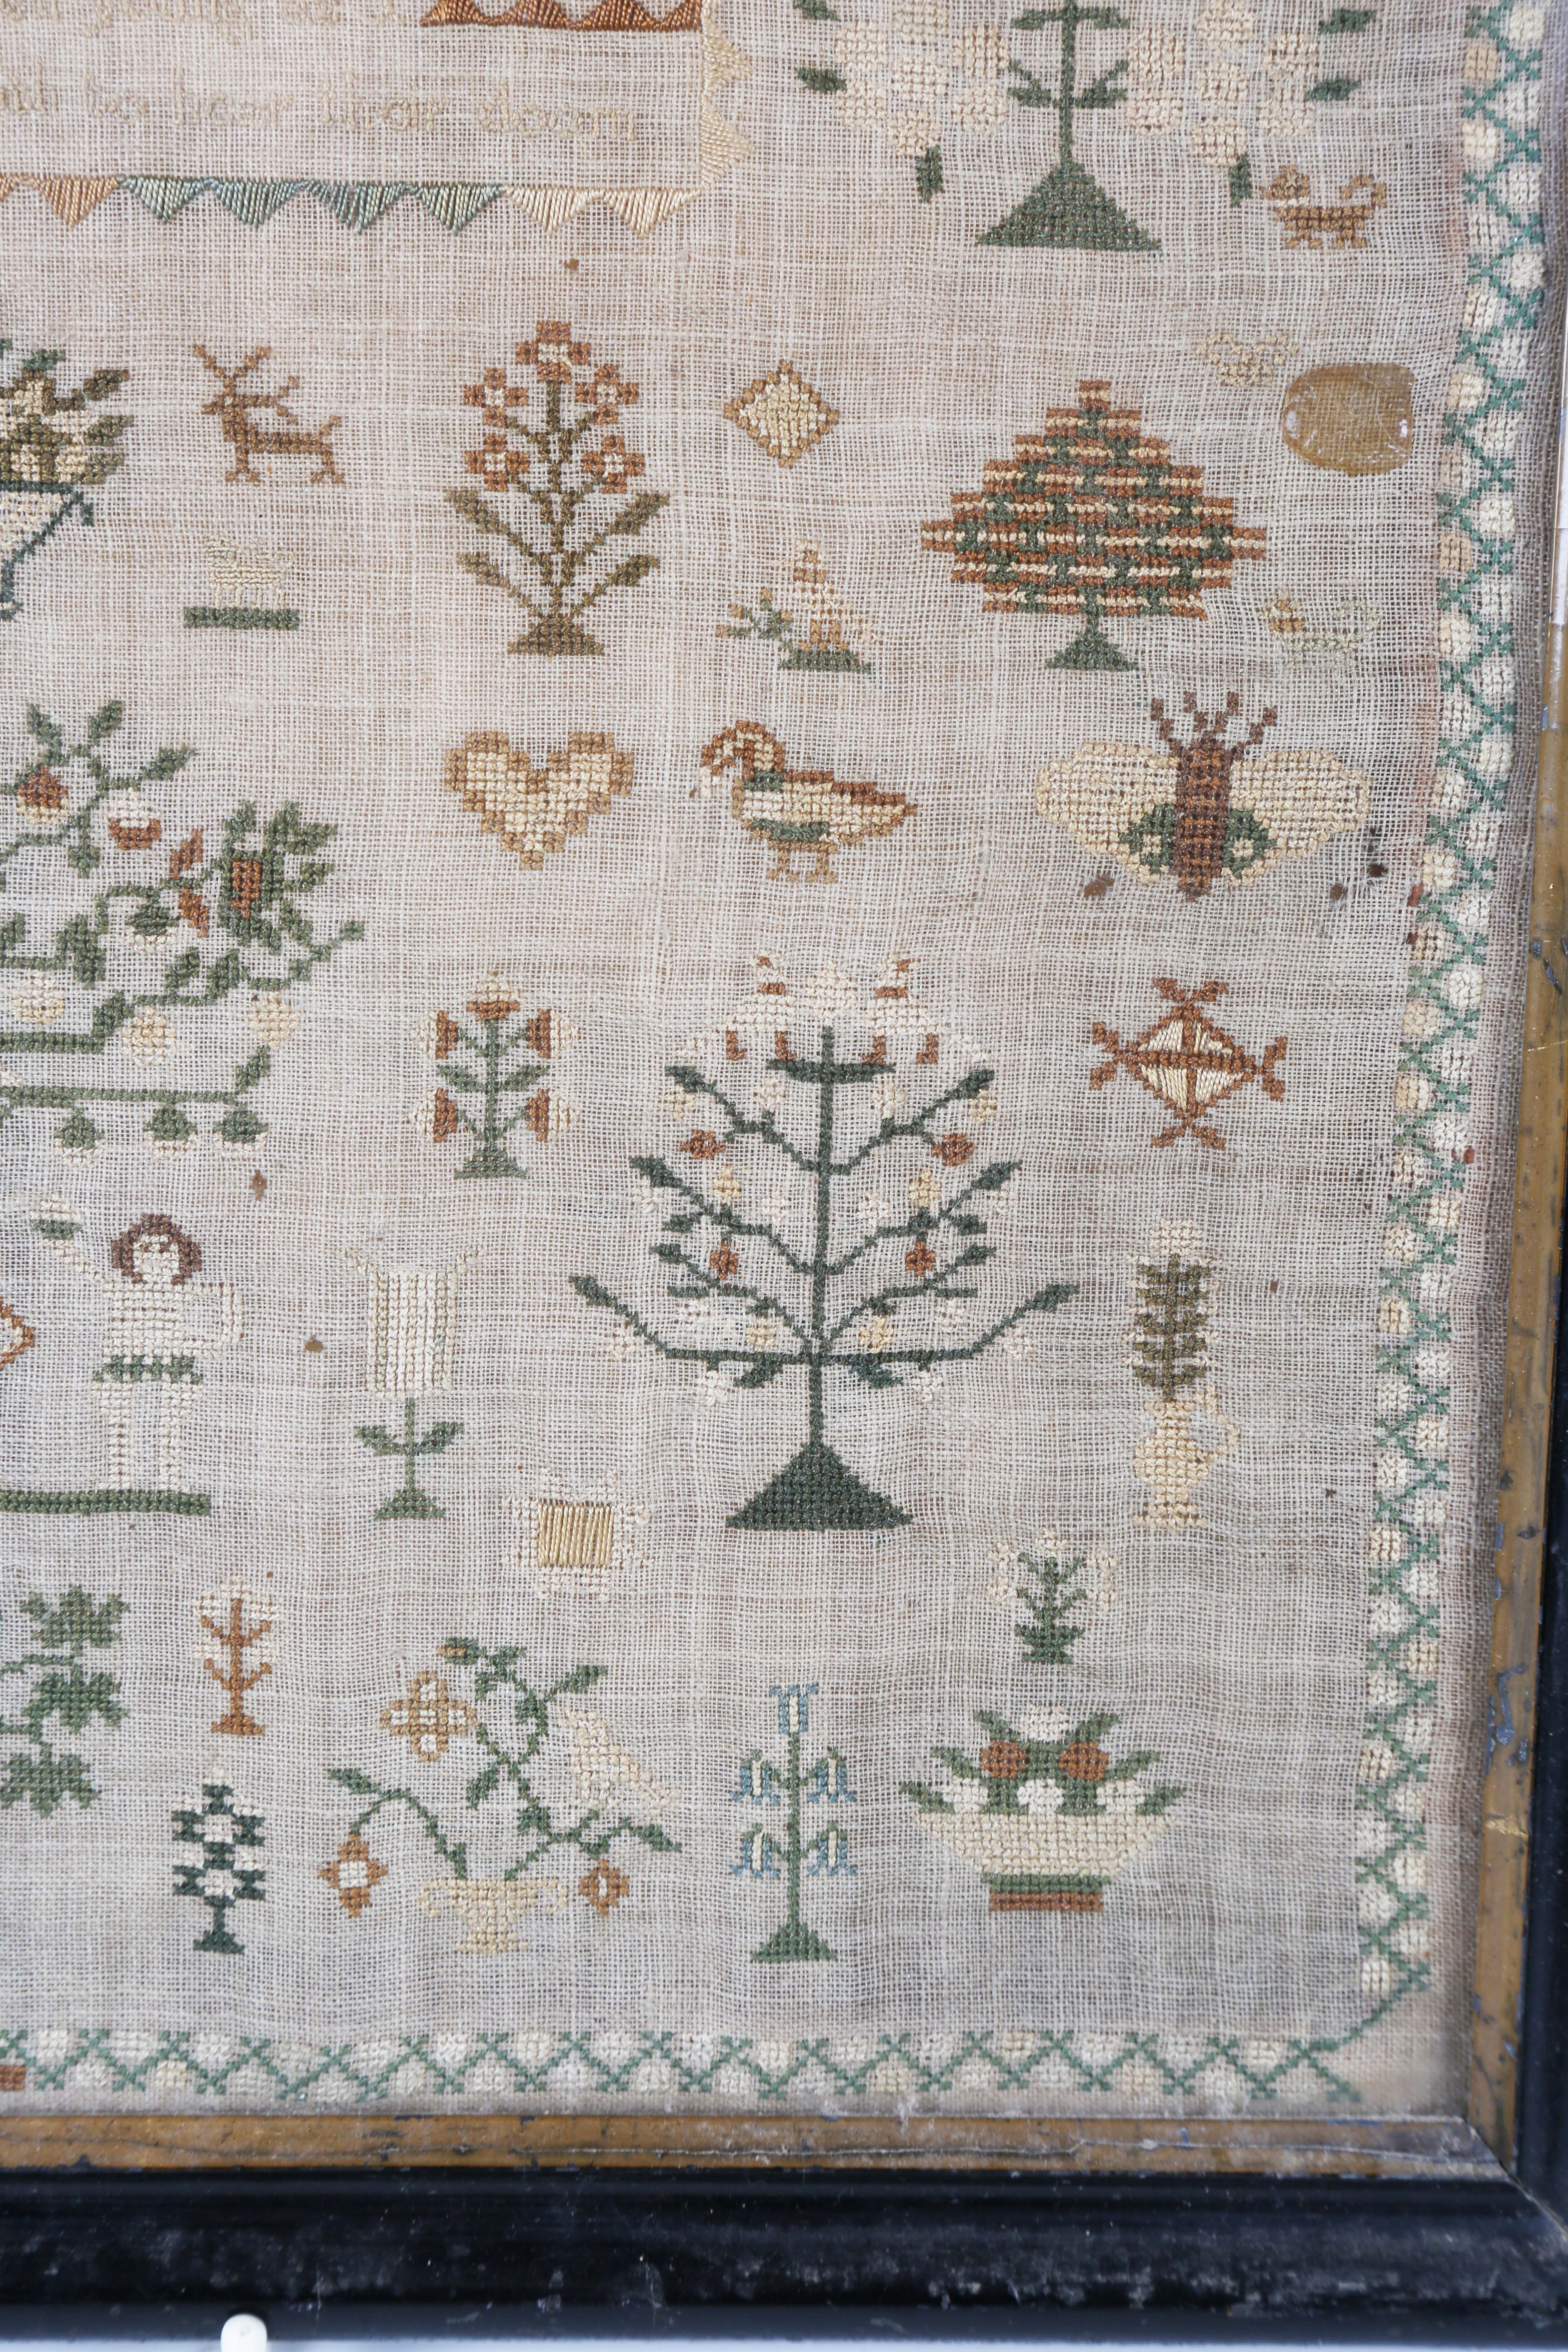 An early Victorian needlework sampler by Jane Constance, aged 13, dated 'January 6 1839', finely - Image 8 of 14